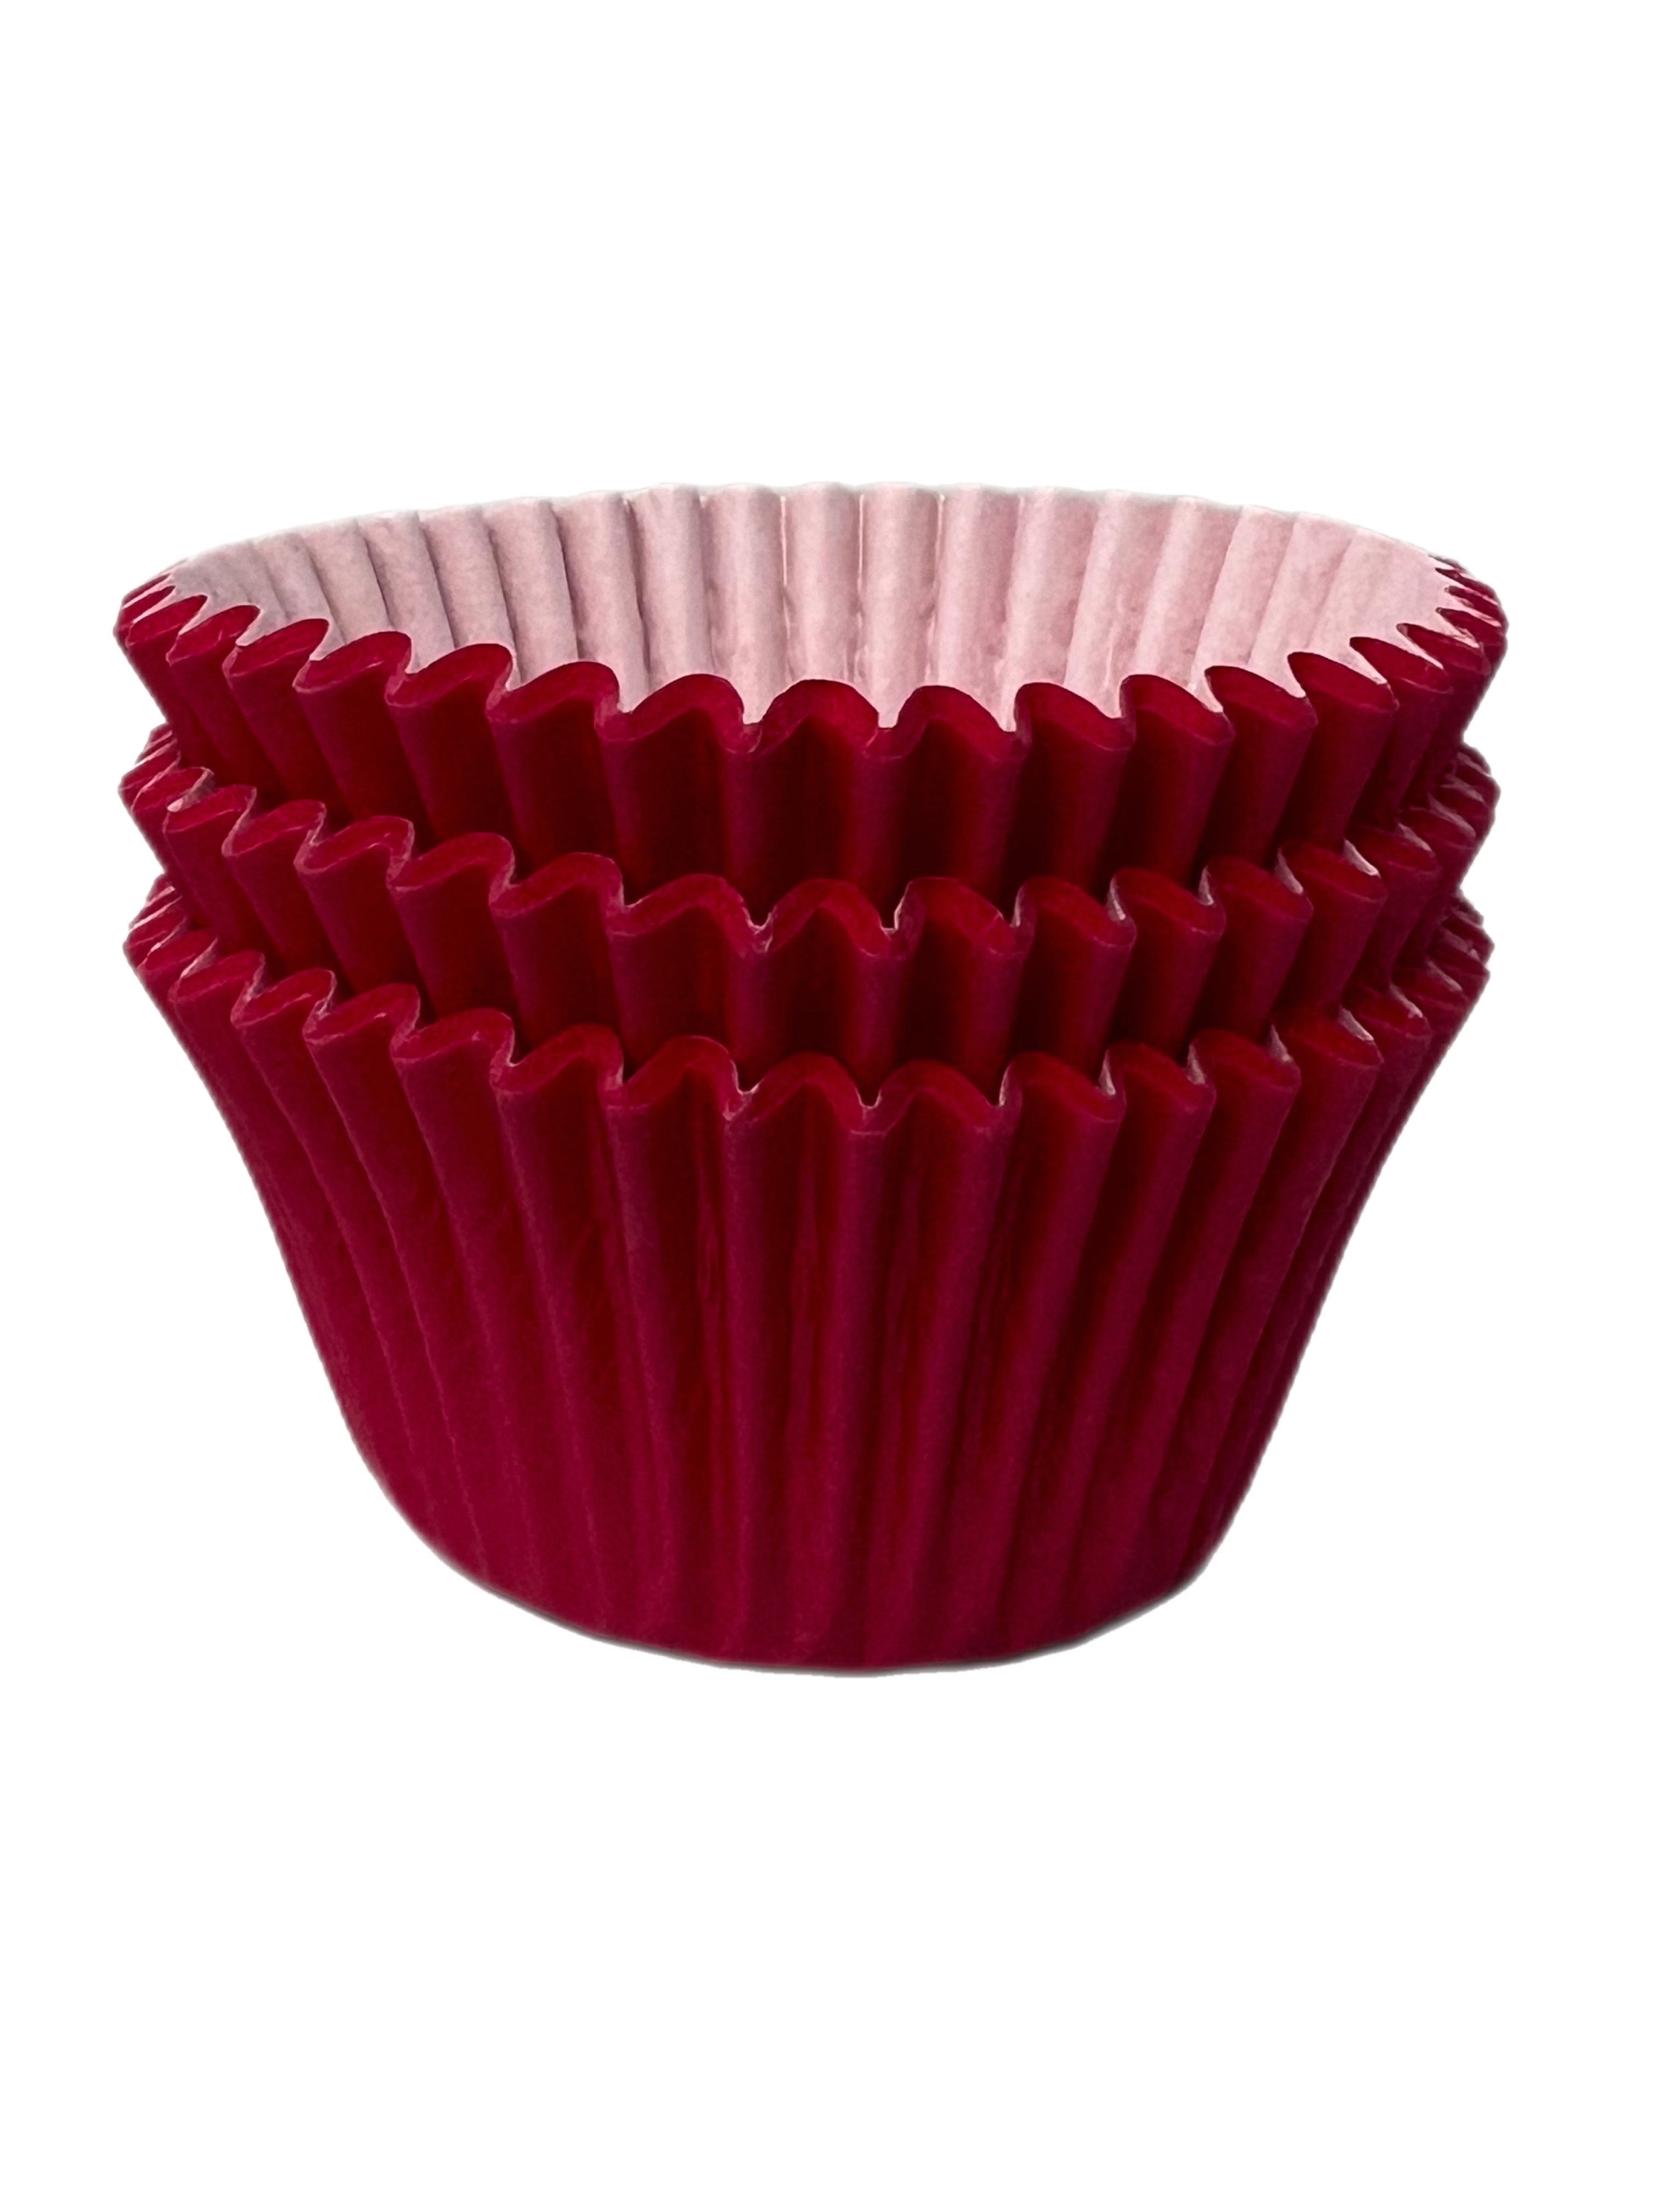 Paper Cupcake Baking Cases - pack of Approx 36 - Cerise / Bright Pink